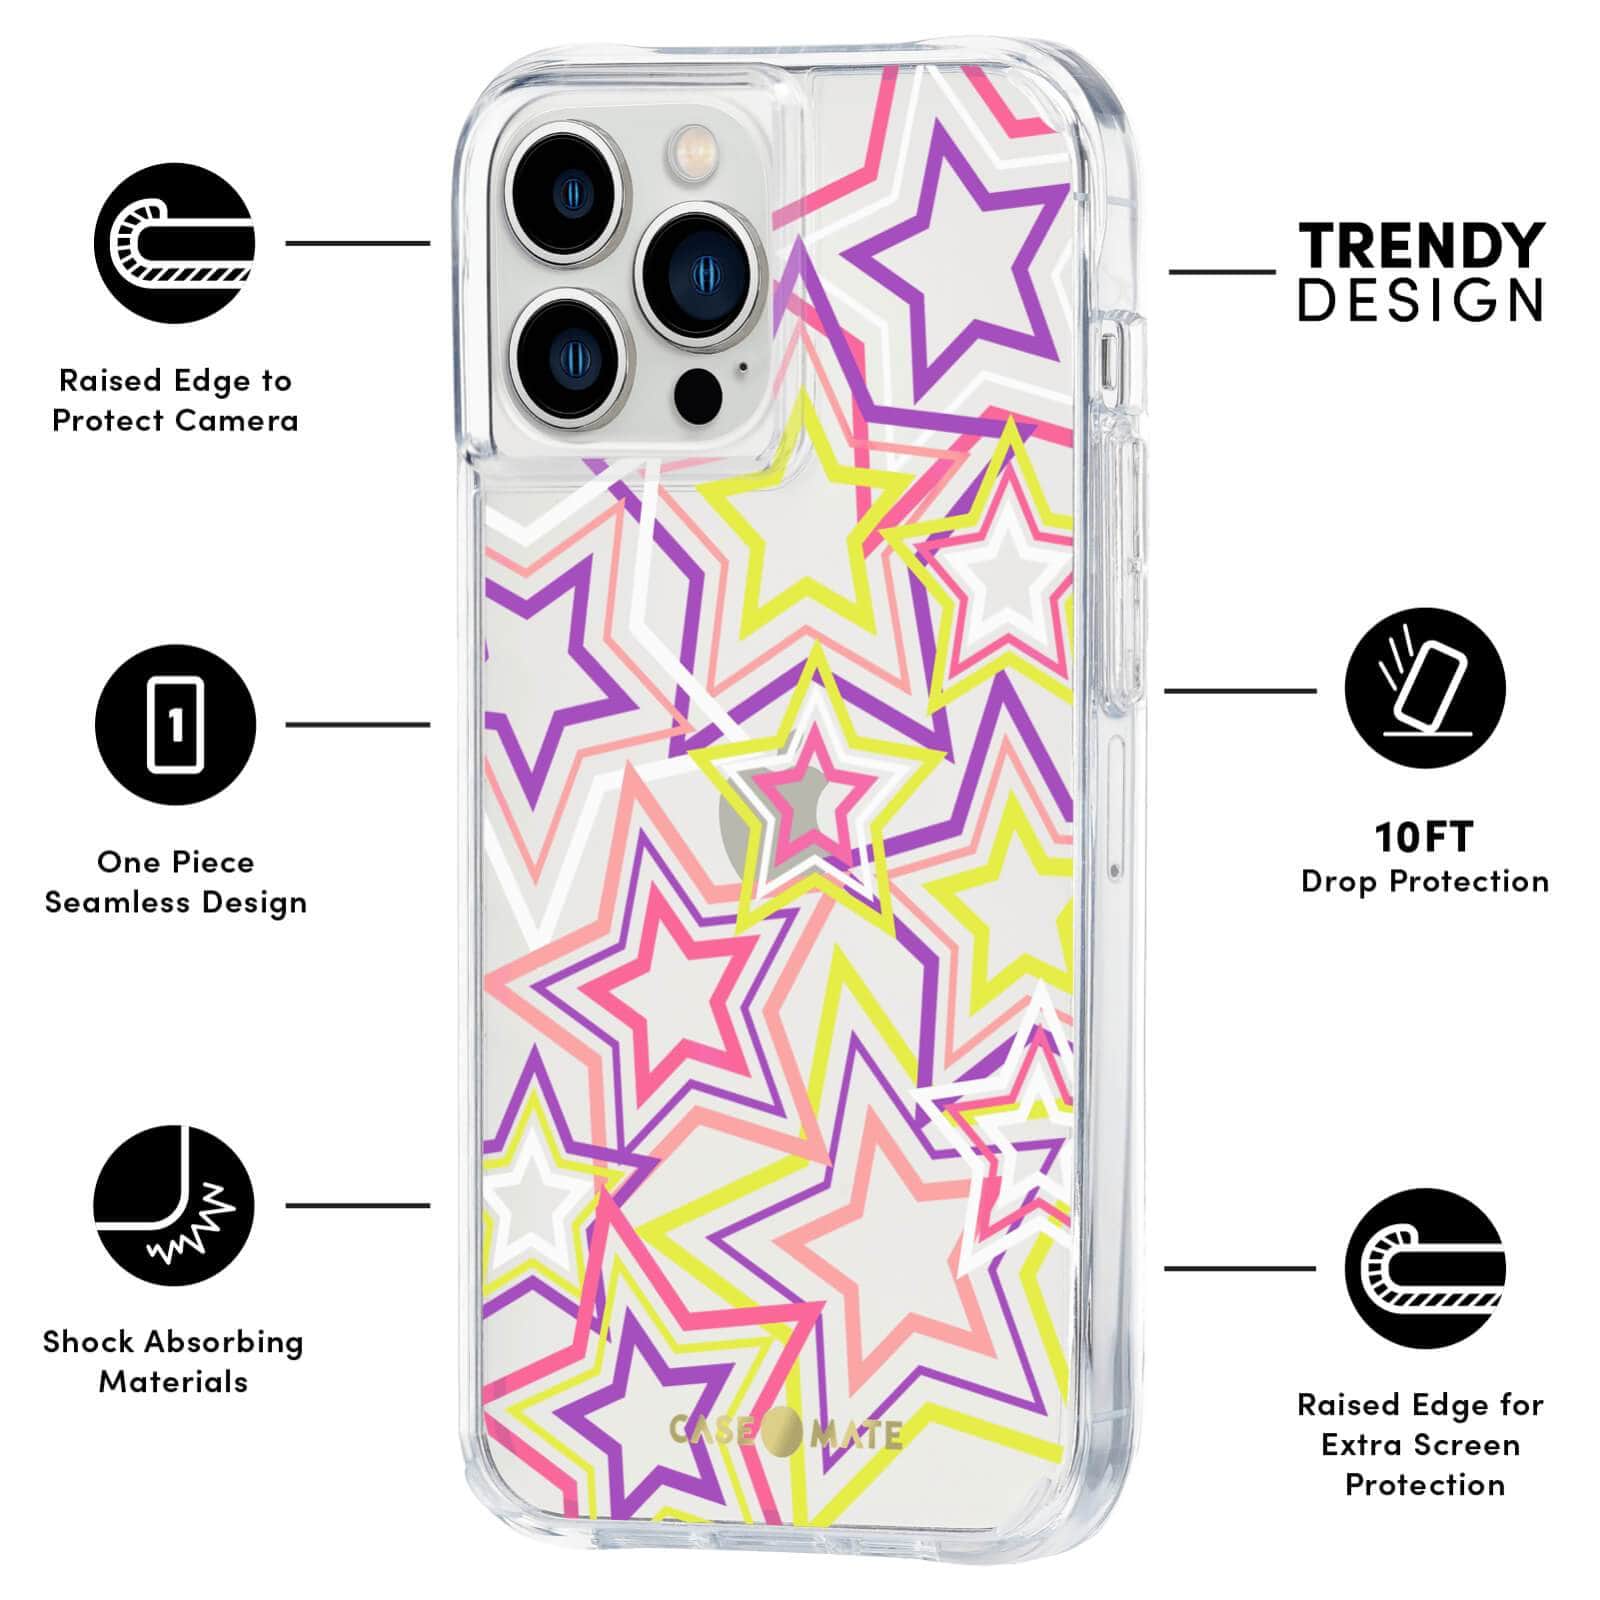 FEATURES: RAISED CAMERA TO PROTECT CAMERA, ONE PIECE SEAMLESS DESIGN, SHOCK ABSORBING MATERIALS, TRENDY DESIGN, 10 FT DROP PROTECTION, RAISED EDGE FOR EXTRA SCREEN PROTECTION. COLOR::NEON STARS